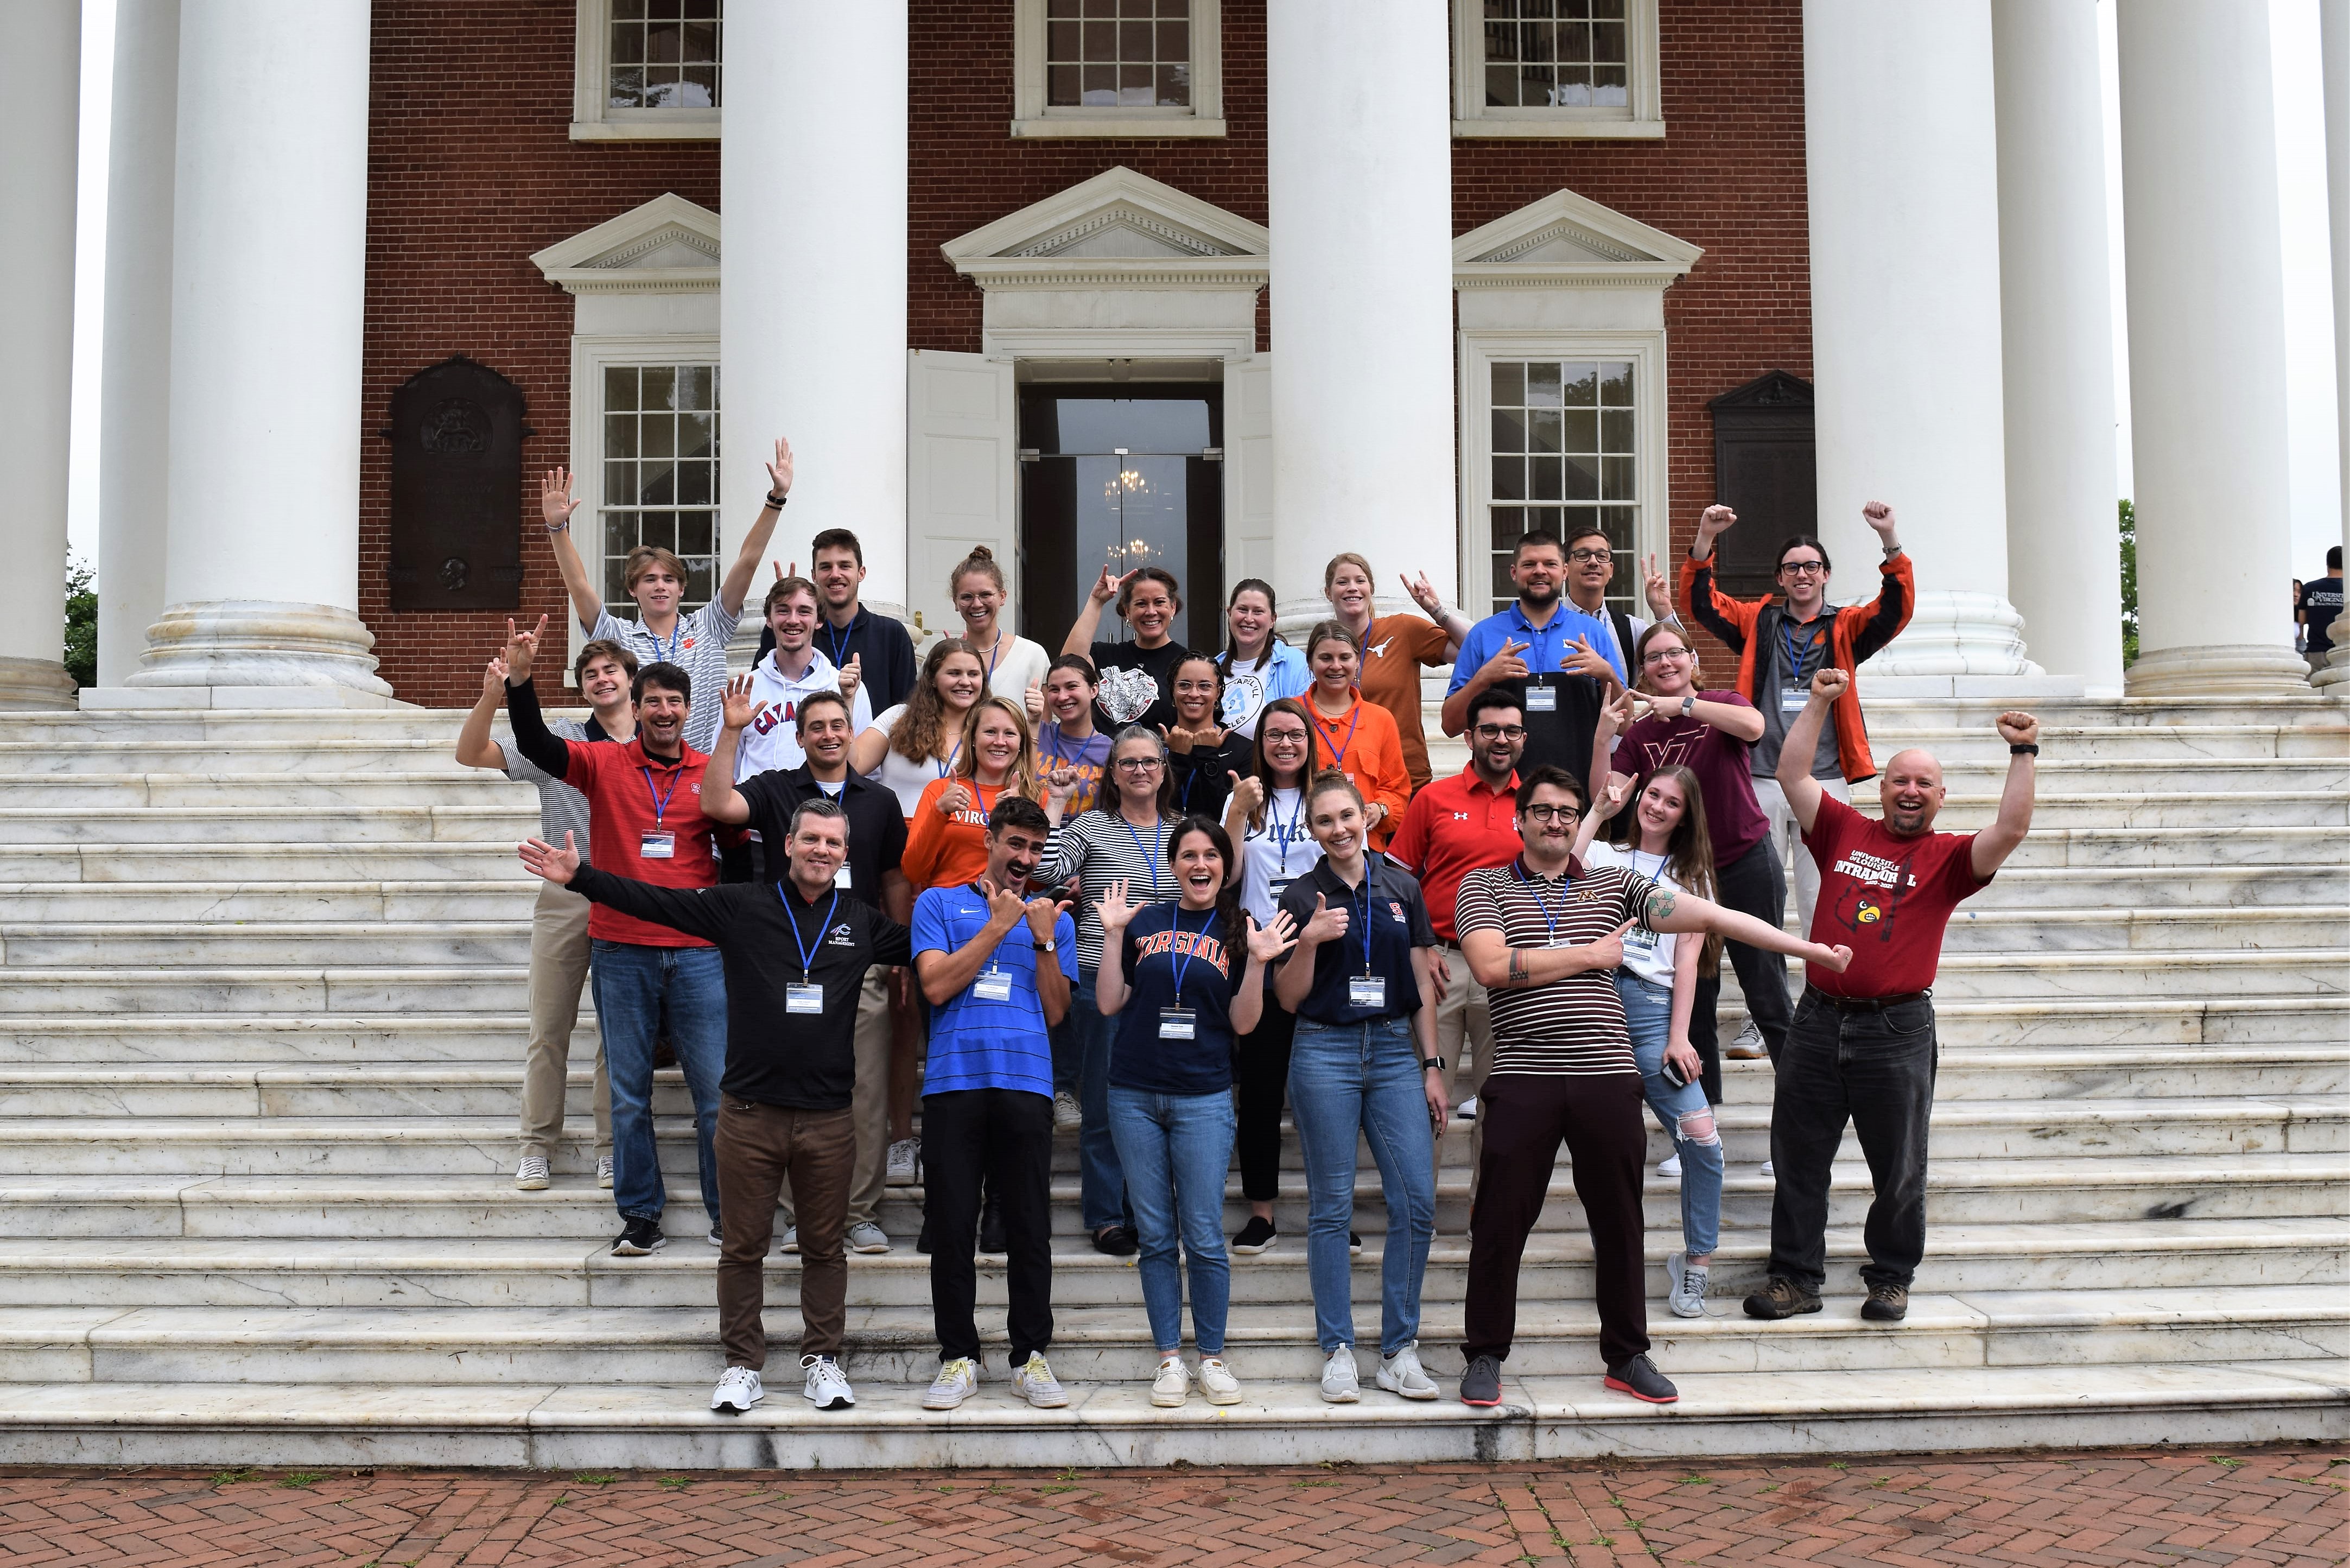 29 smiling people standing as a group on the steps of the Rotunda. While holding out their arms or making hand symbols representing their Universities, they all wear university or association branded shirts.